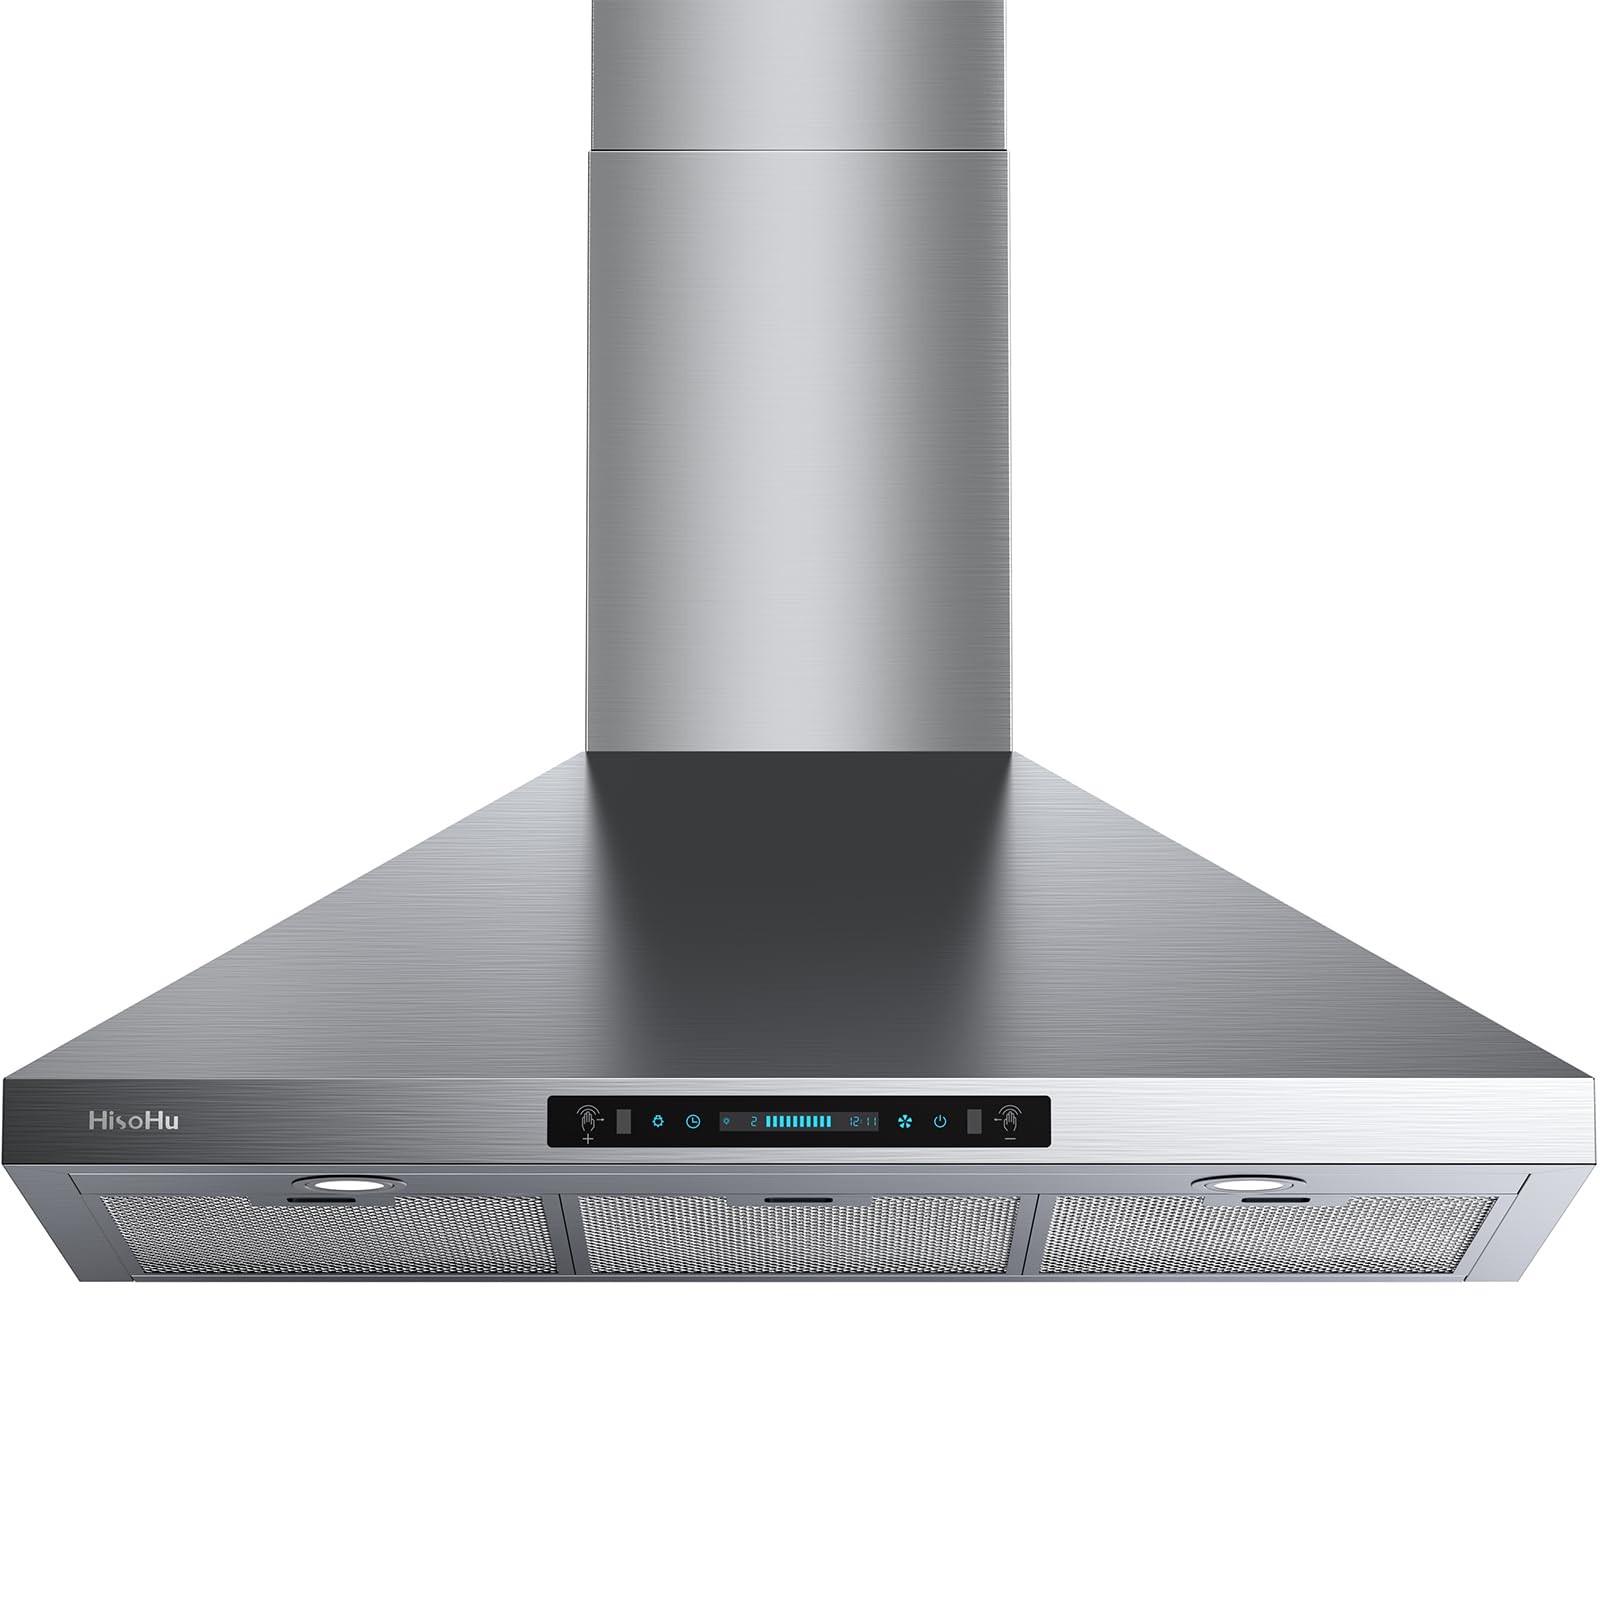 Wall Mount Range Hood 36 Inch, 780 CFM with Ducted Convertible Ductless (Kit Included), 4 Speed Gesture Sensing&Touch Control Panel, Stainless Steel Kitchen Vent (36 Inch)